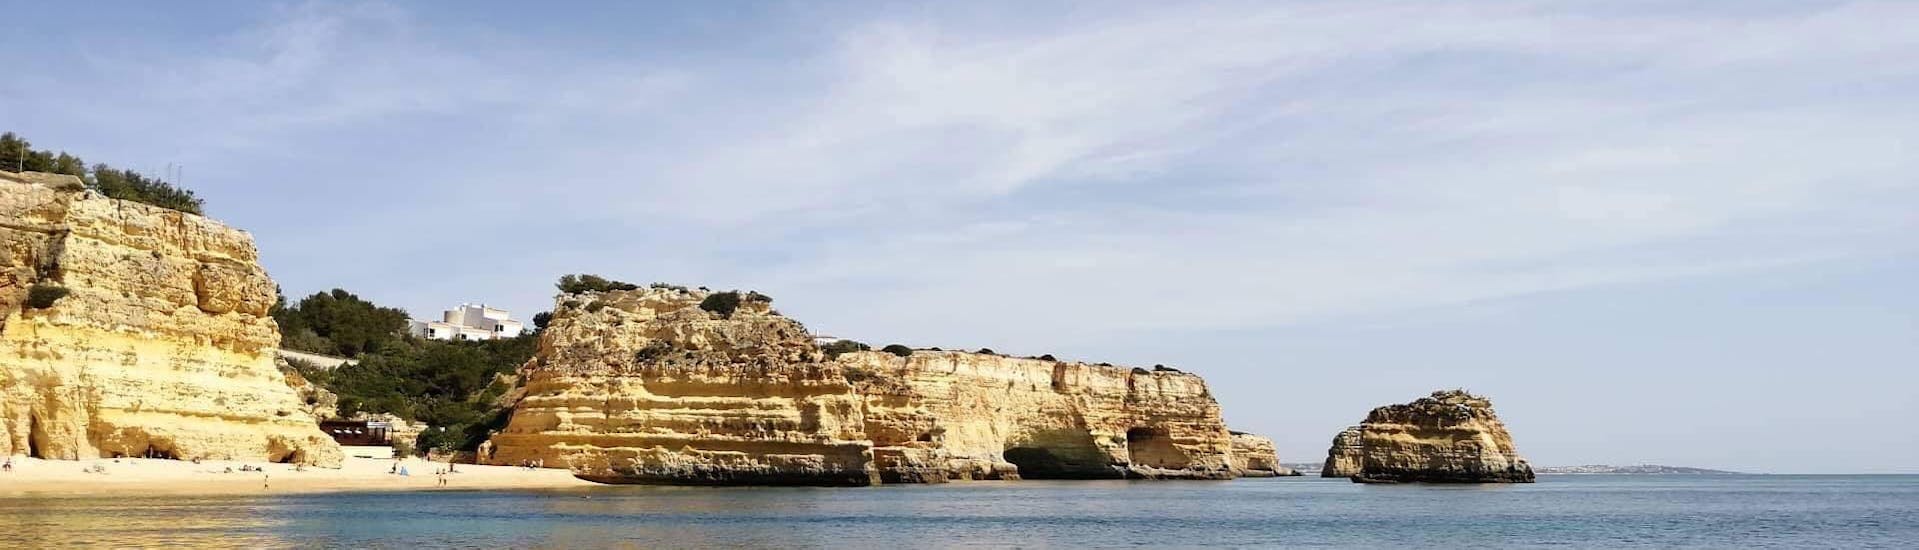 During the Boat Trip to Benagil Caves from Portimão with Royal Nautic Portimão, the tour participants can enjoy an incredible view of impressive rock formations in the sea.